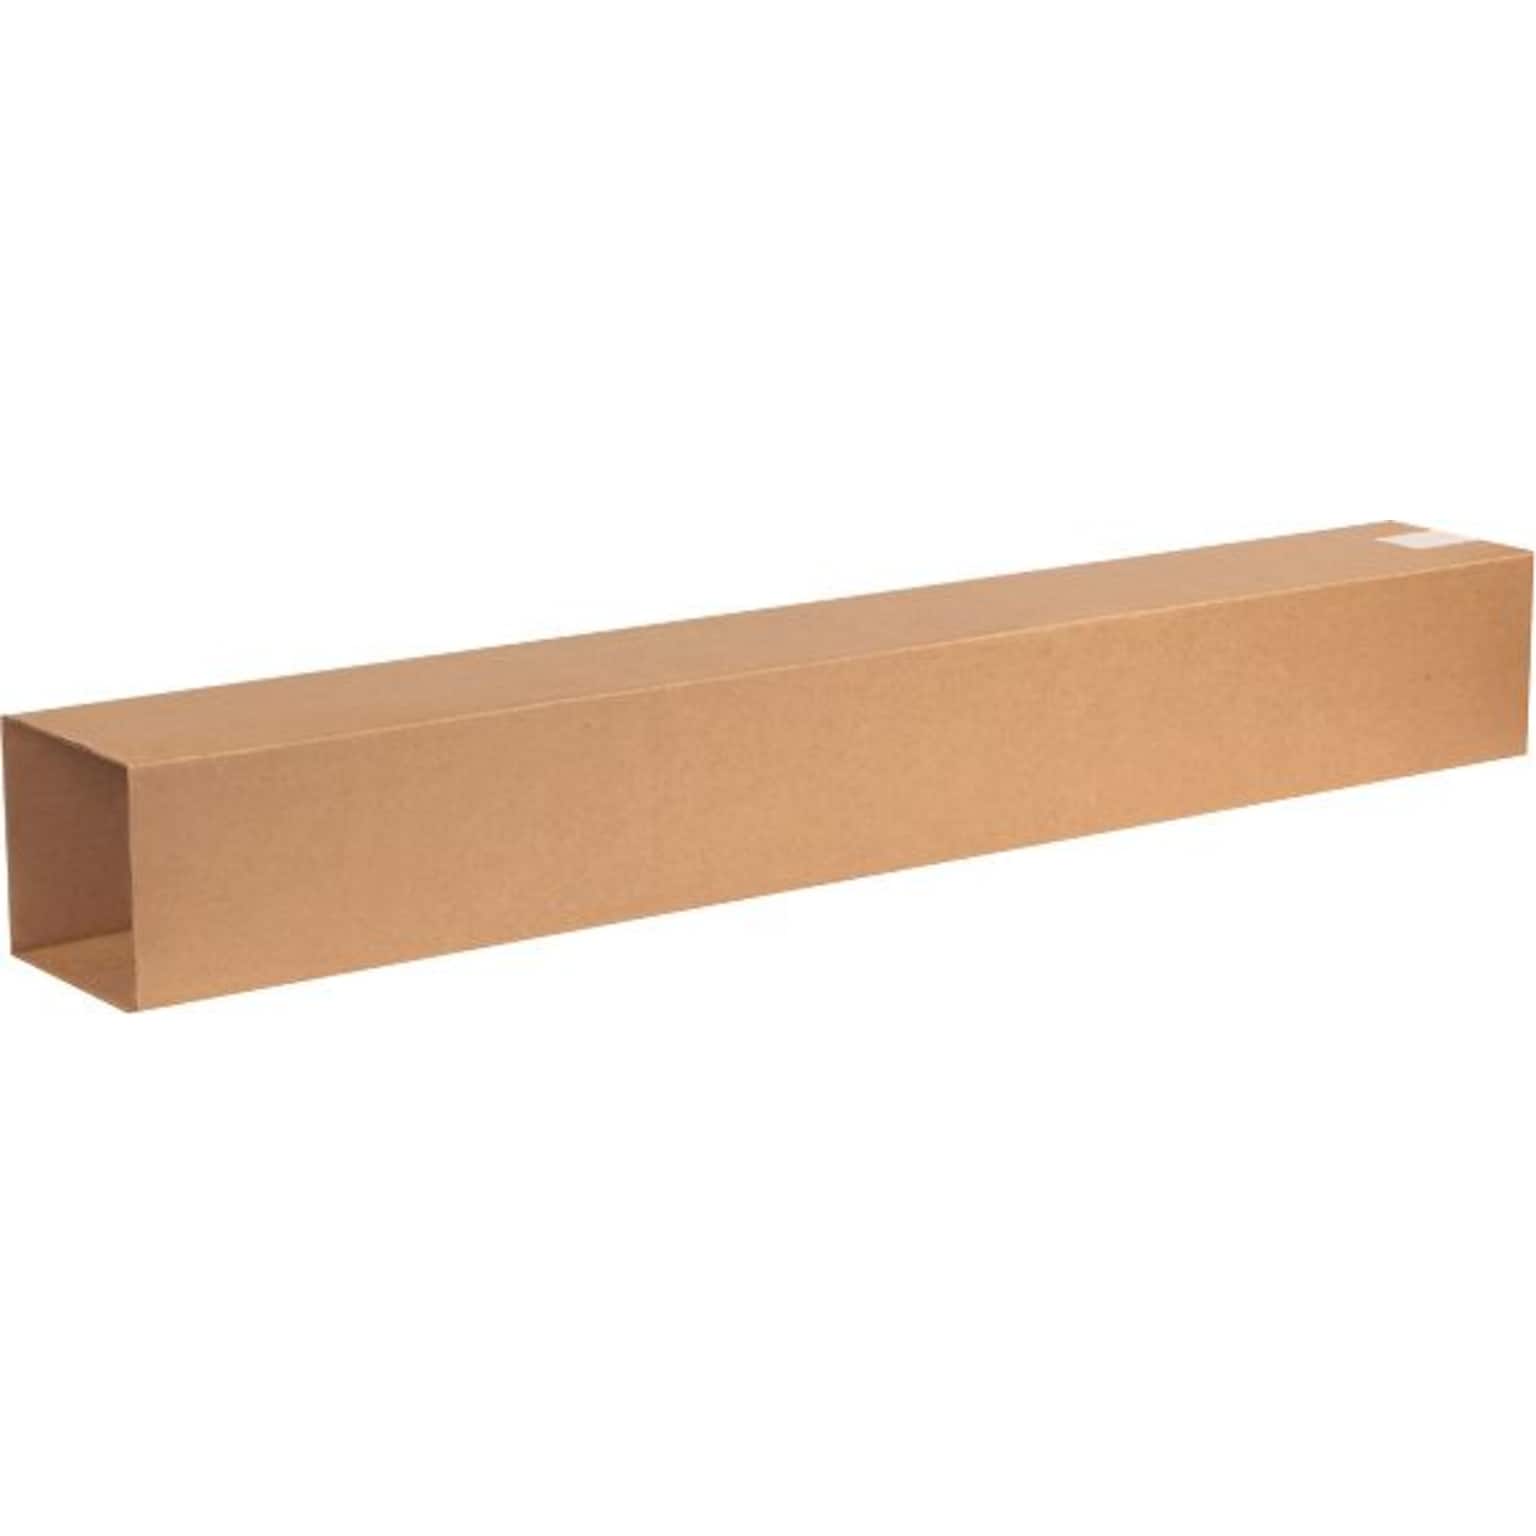 6 x 6 x 48 Shipping Boxes, Brown, 25/Bundle, Box 1 of 2 (T6648INNER)